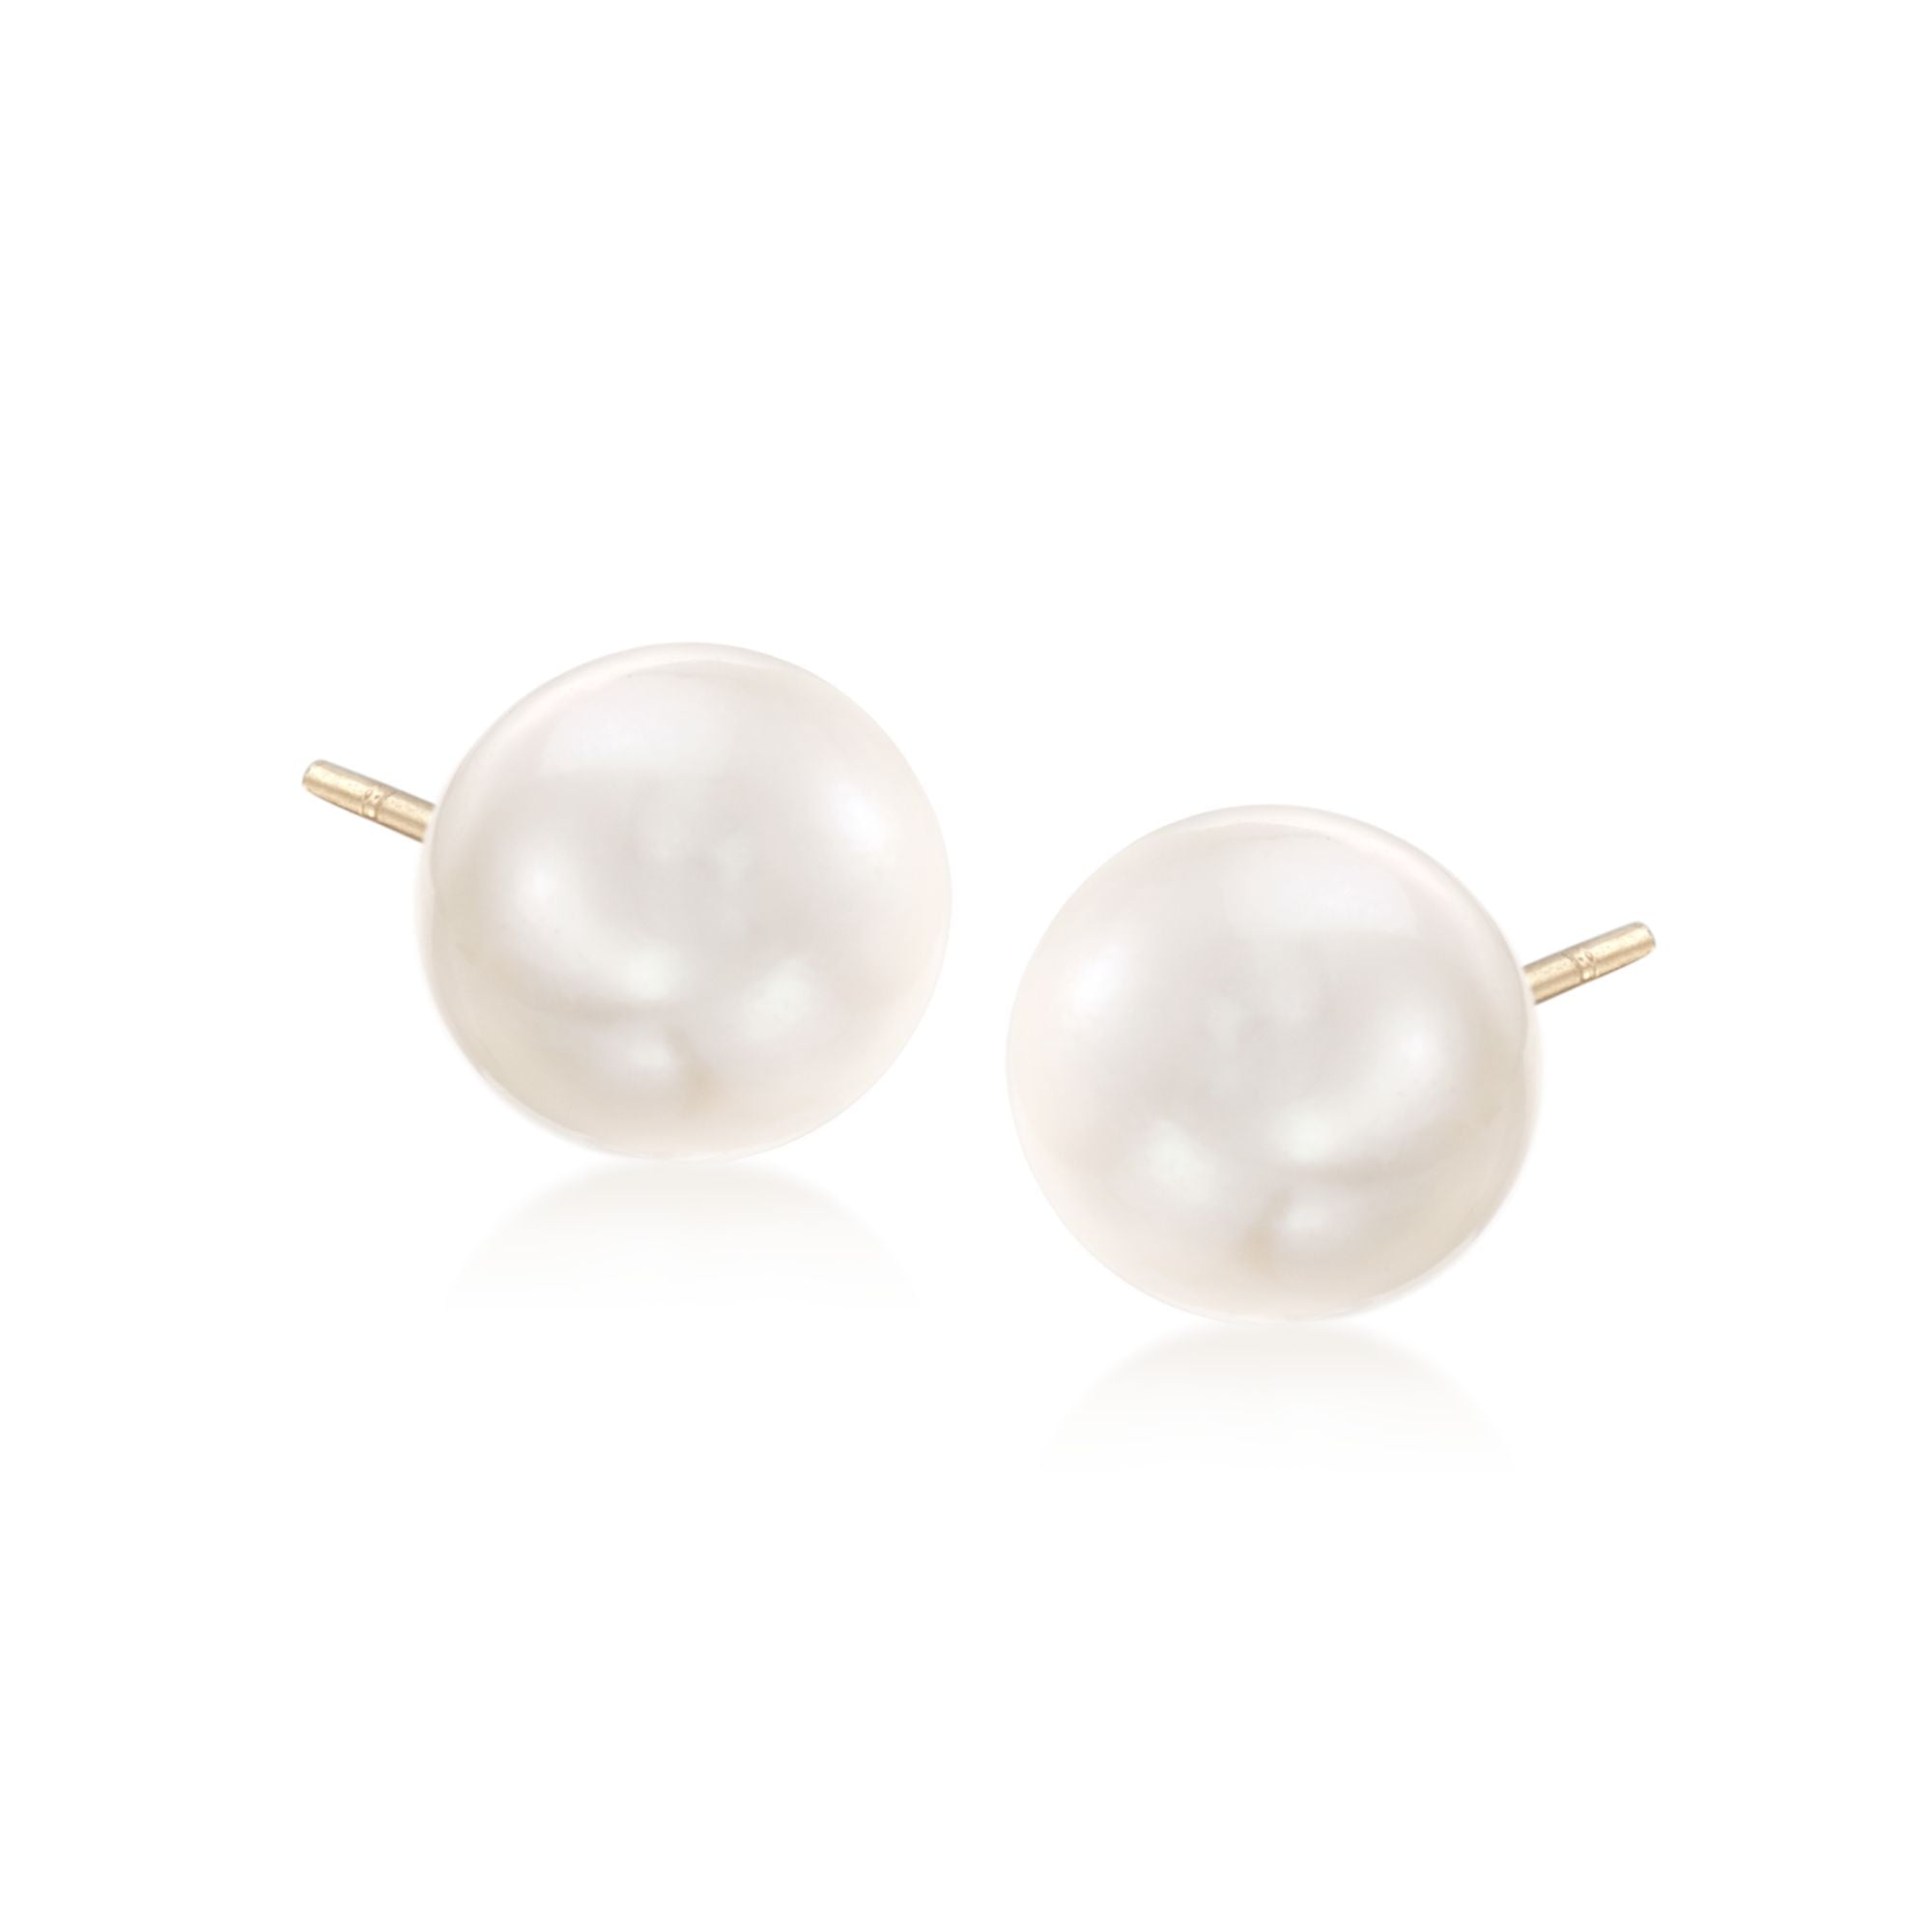 Jewel Tie 925 Sterling Silver 10-11mm White FW Cultured Round Simulated Pearl Stud Earrings